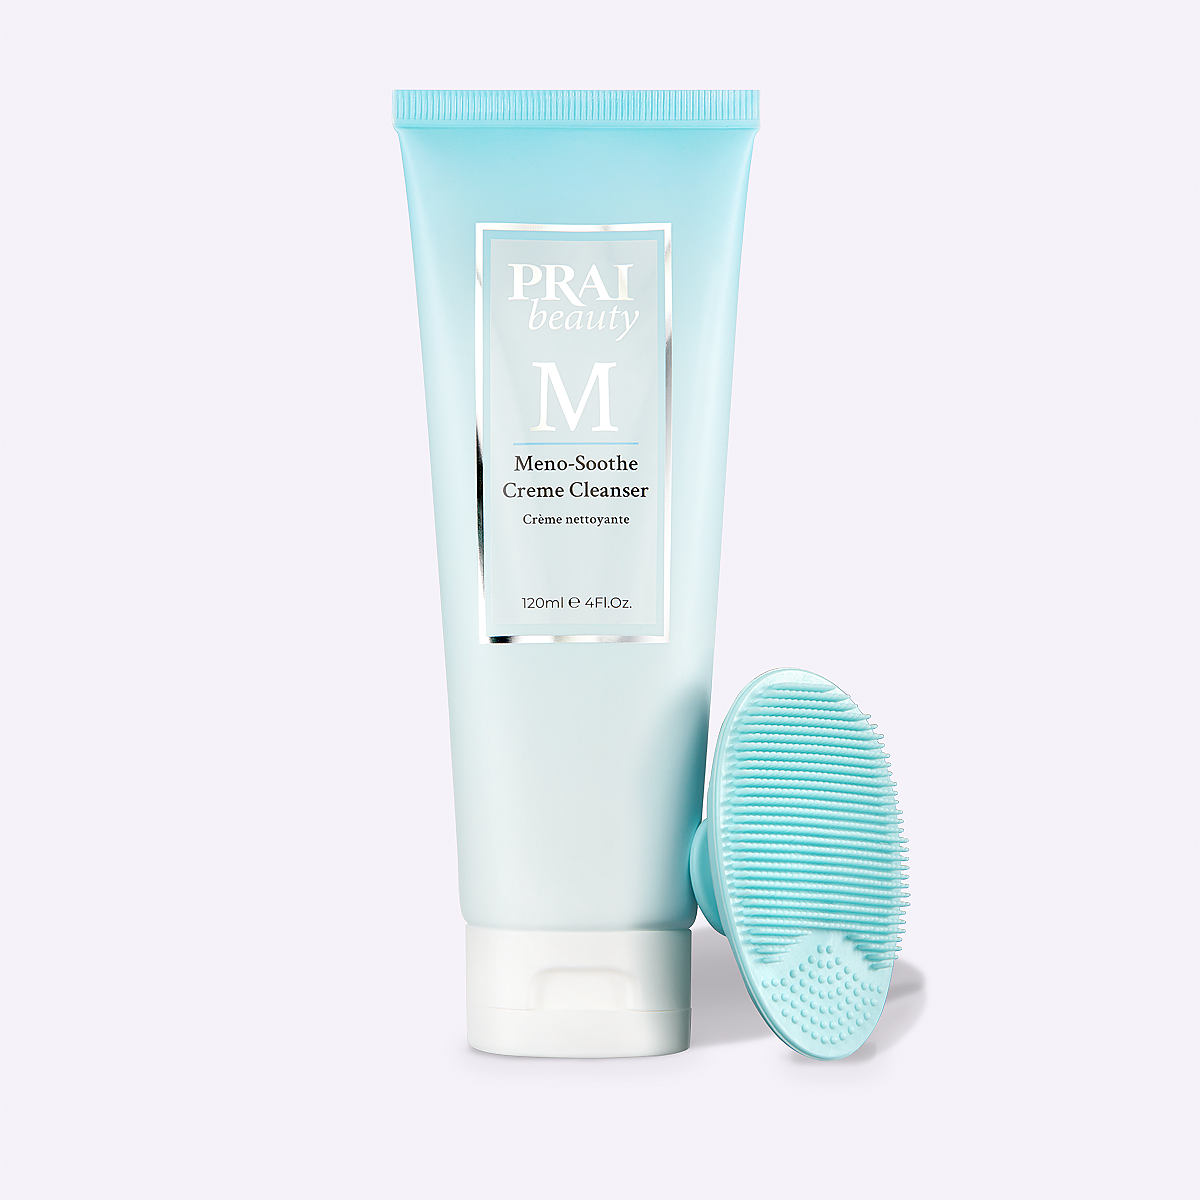 Meno-Soothe Creme Cleanser